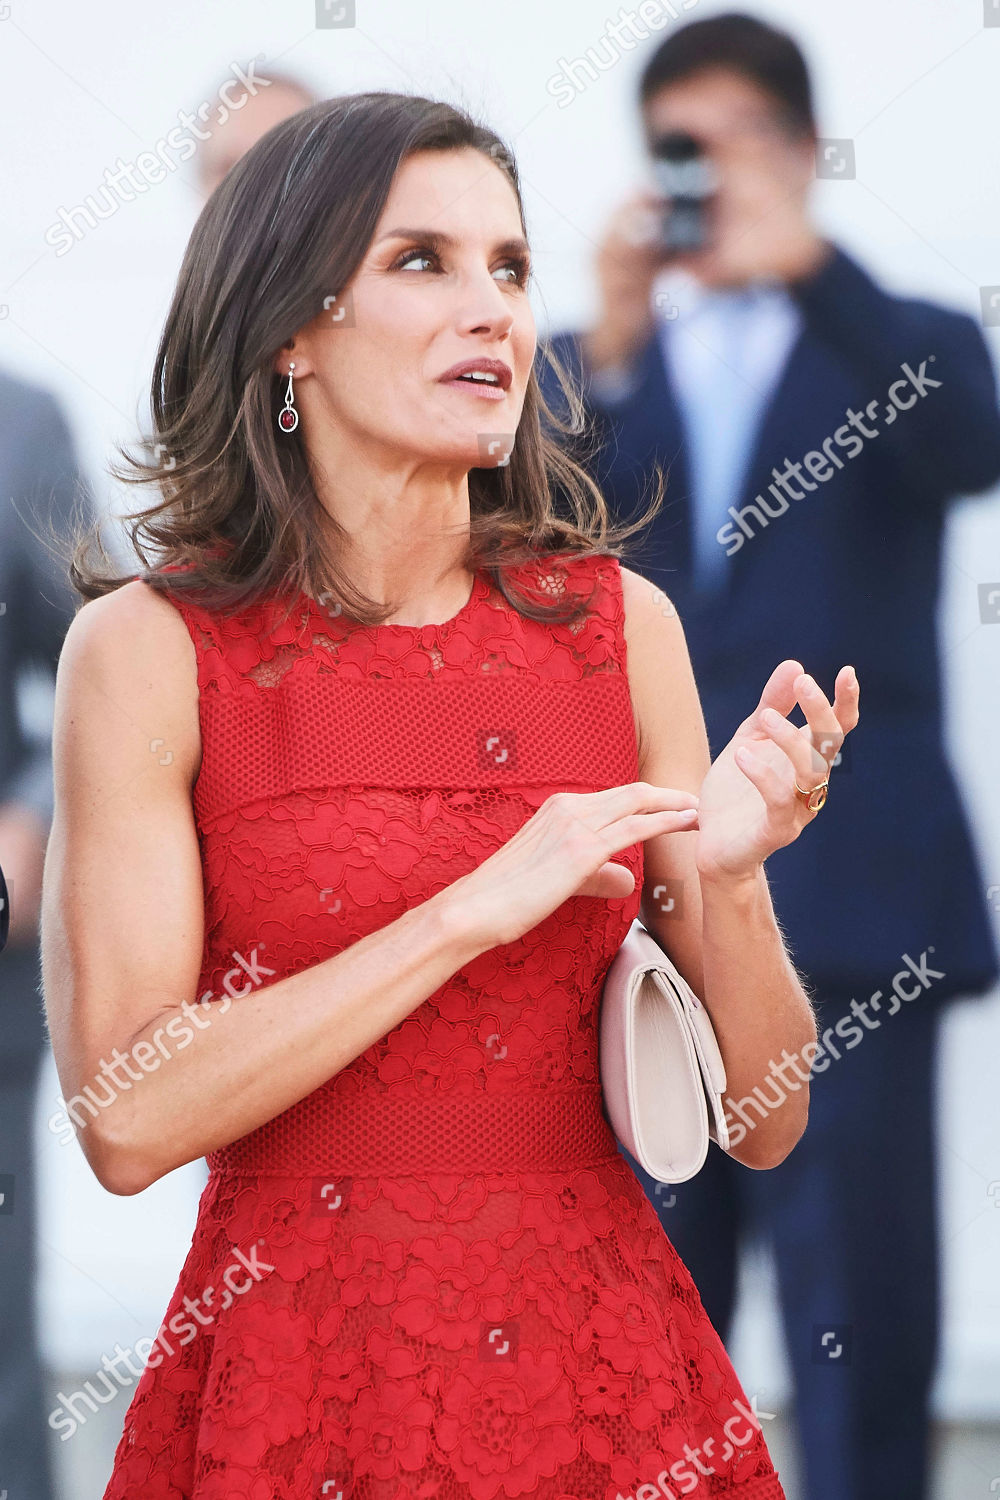 spanish-queen-letizia-attends-inauguration-of-the-world-healthy-food-centre-valencia-spain-shutterstock-editorial-10343737m.jpg